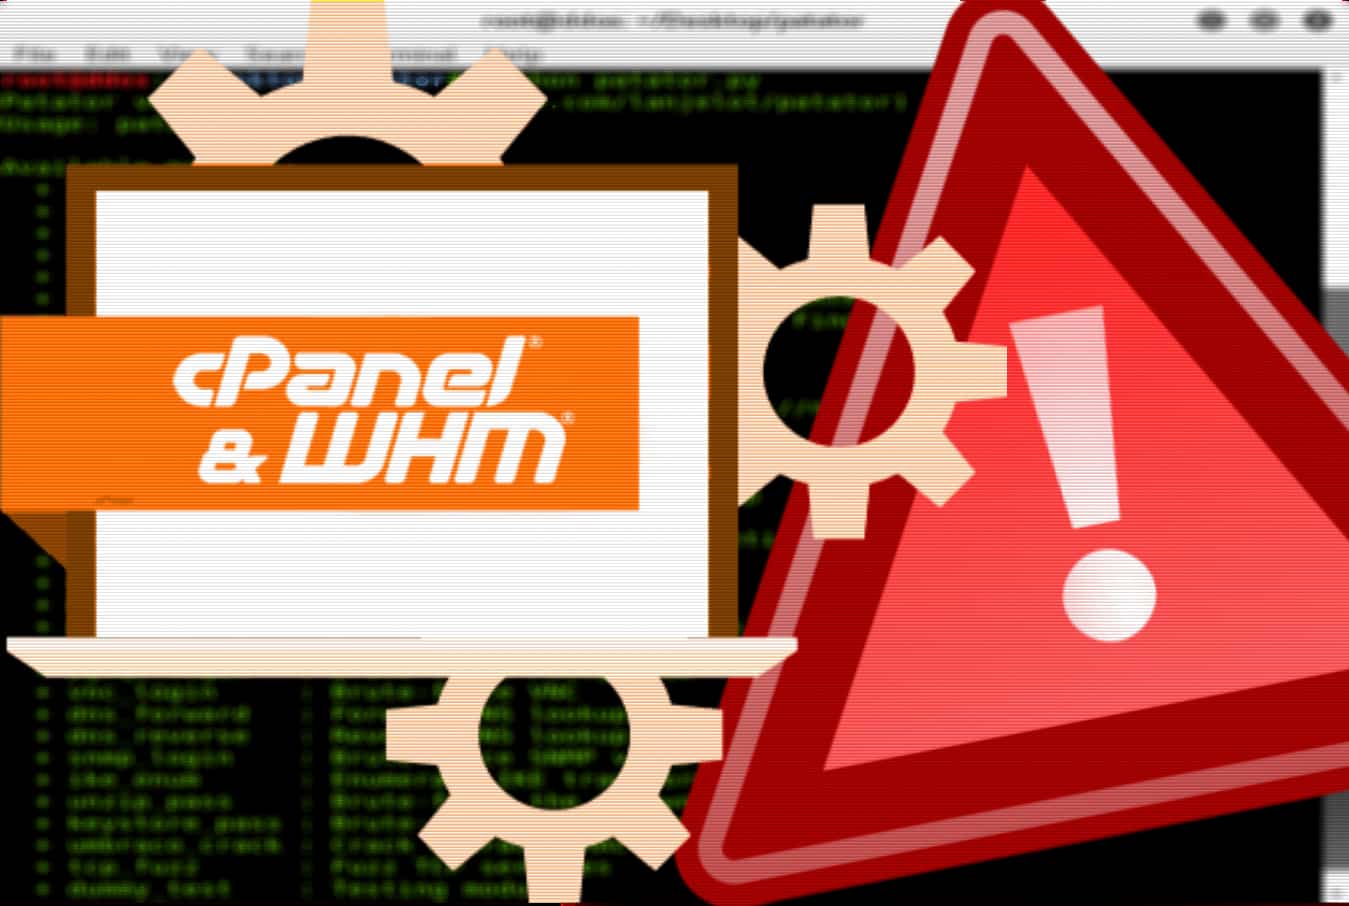 Vulnerability allowed bypassing 2FA in cPanel by bruteforcing